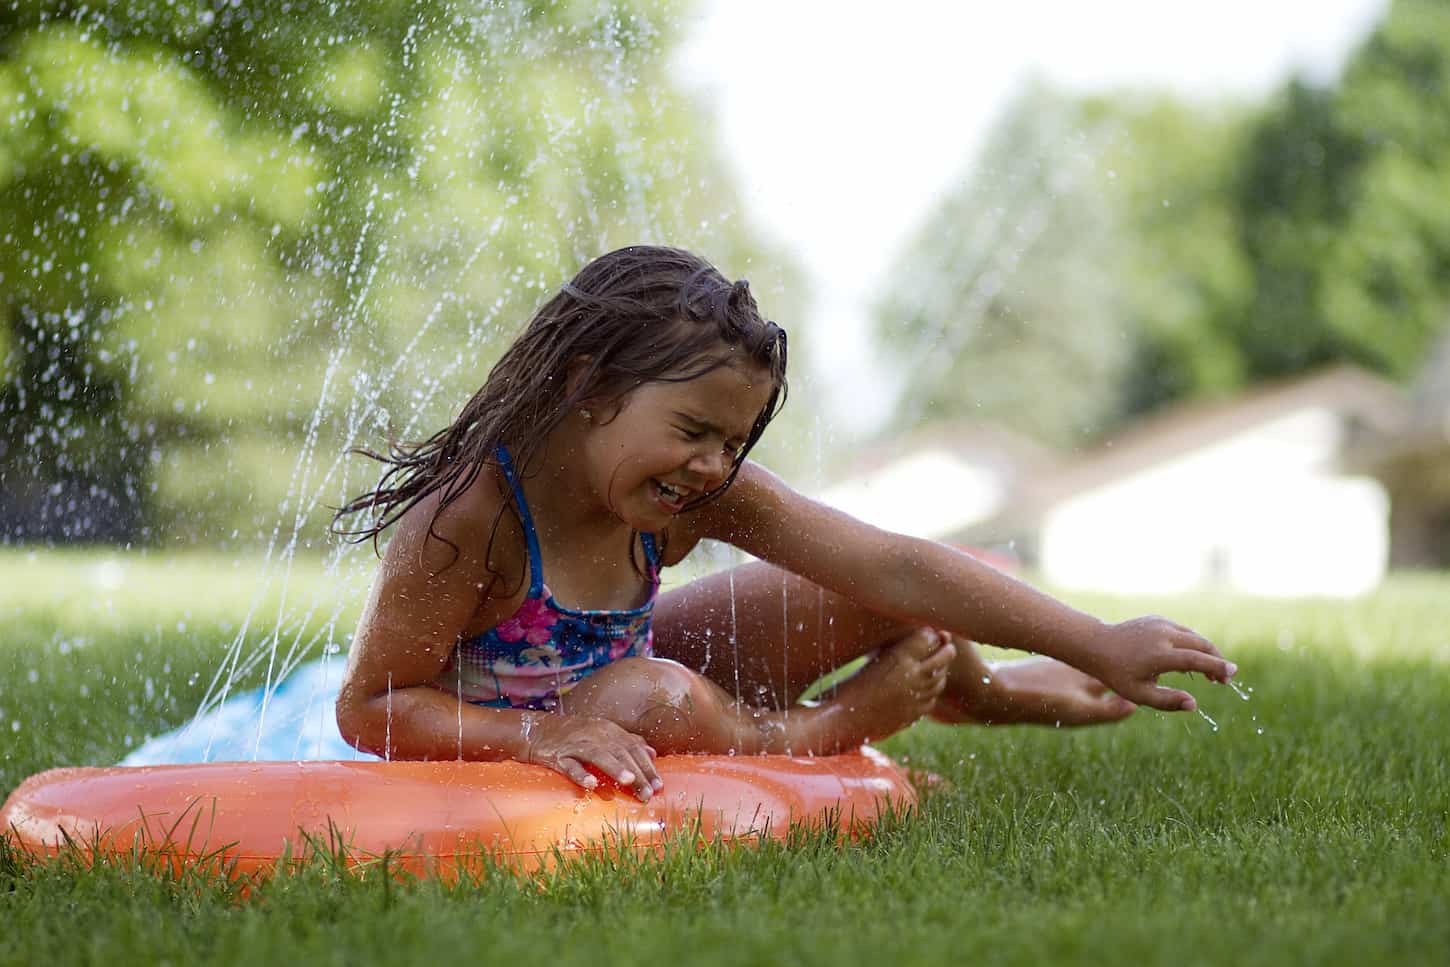 An image of a girl Sliding on a slip and slide outside, kids being kids, water and movement.